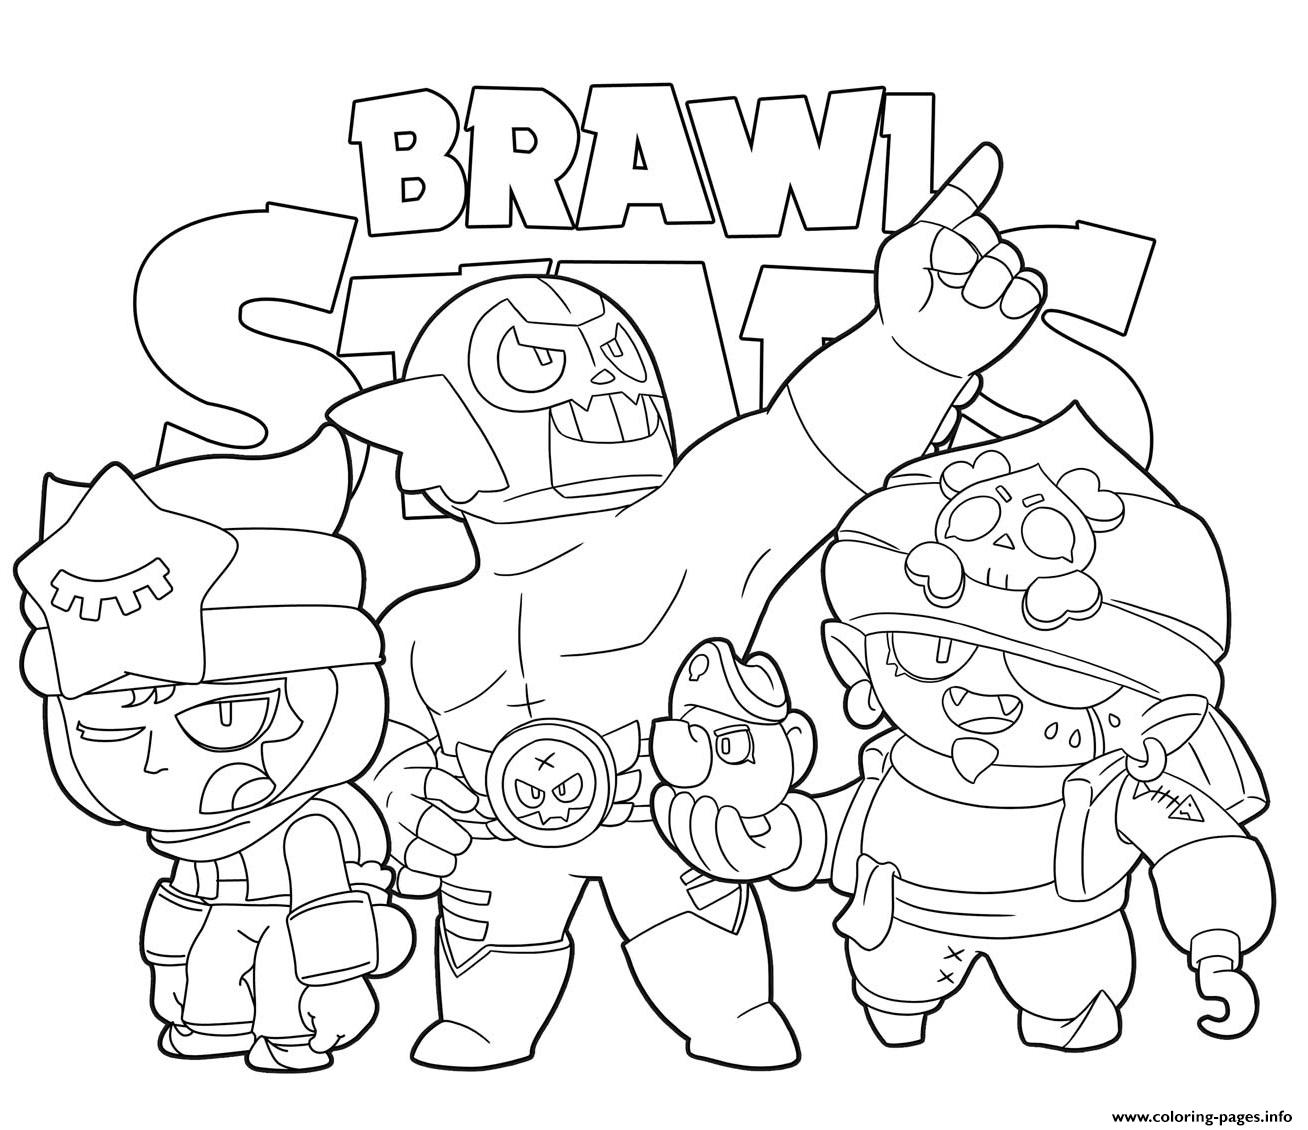 Pirate Sandy And El Rudo Coloring Pages Printable - dessin brawl stars mortis truand